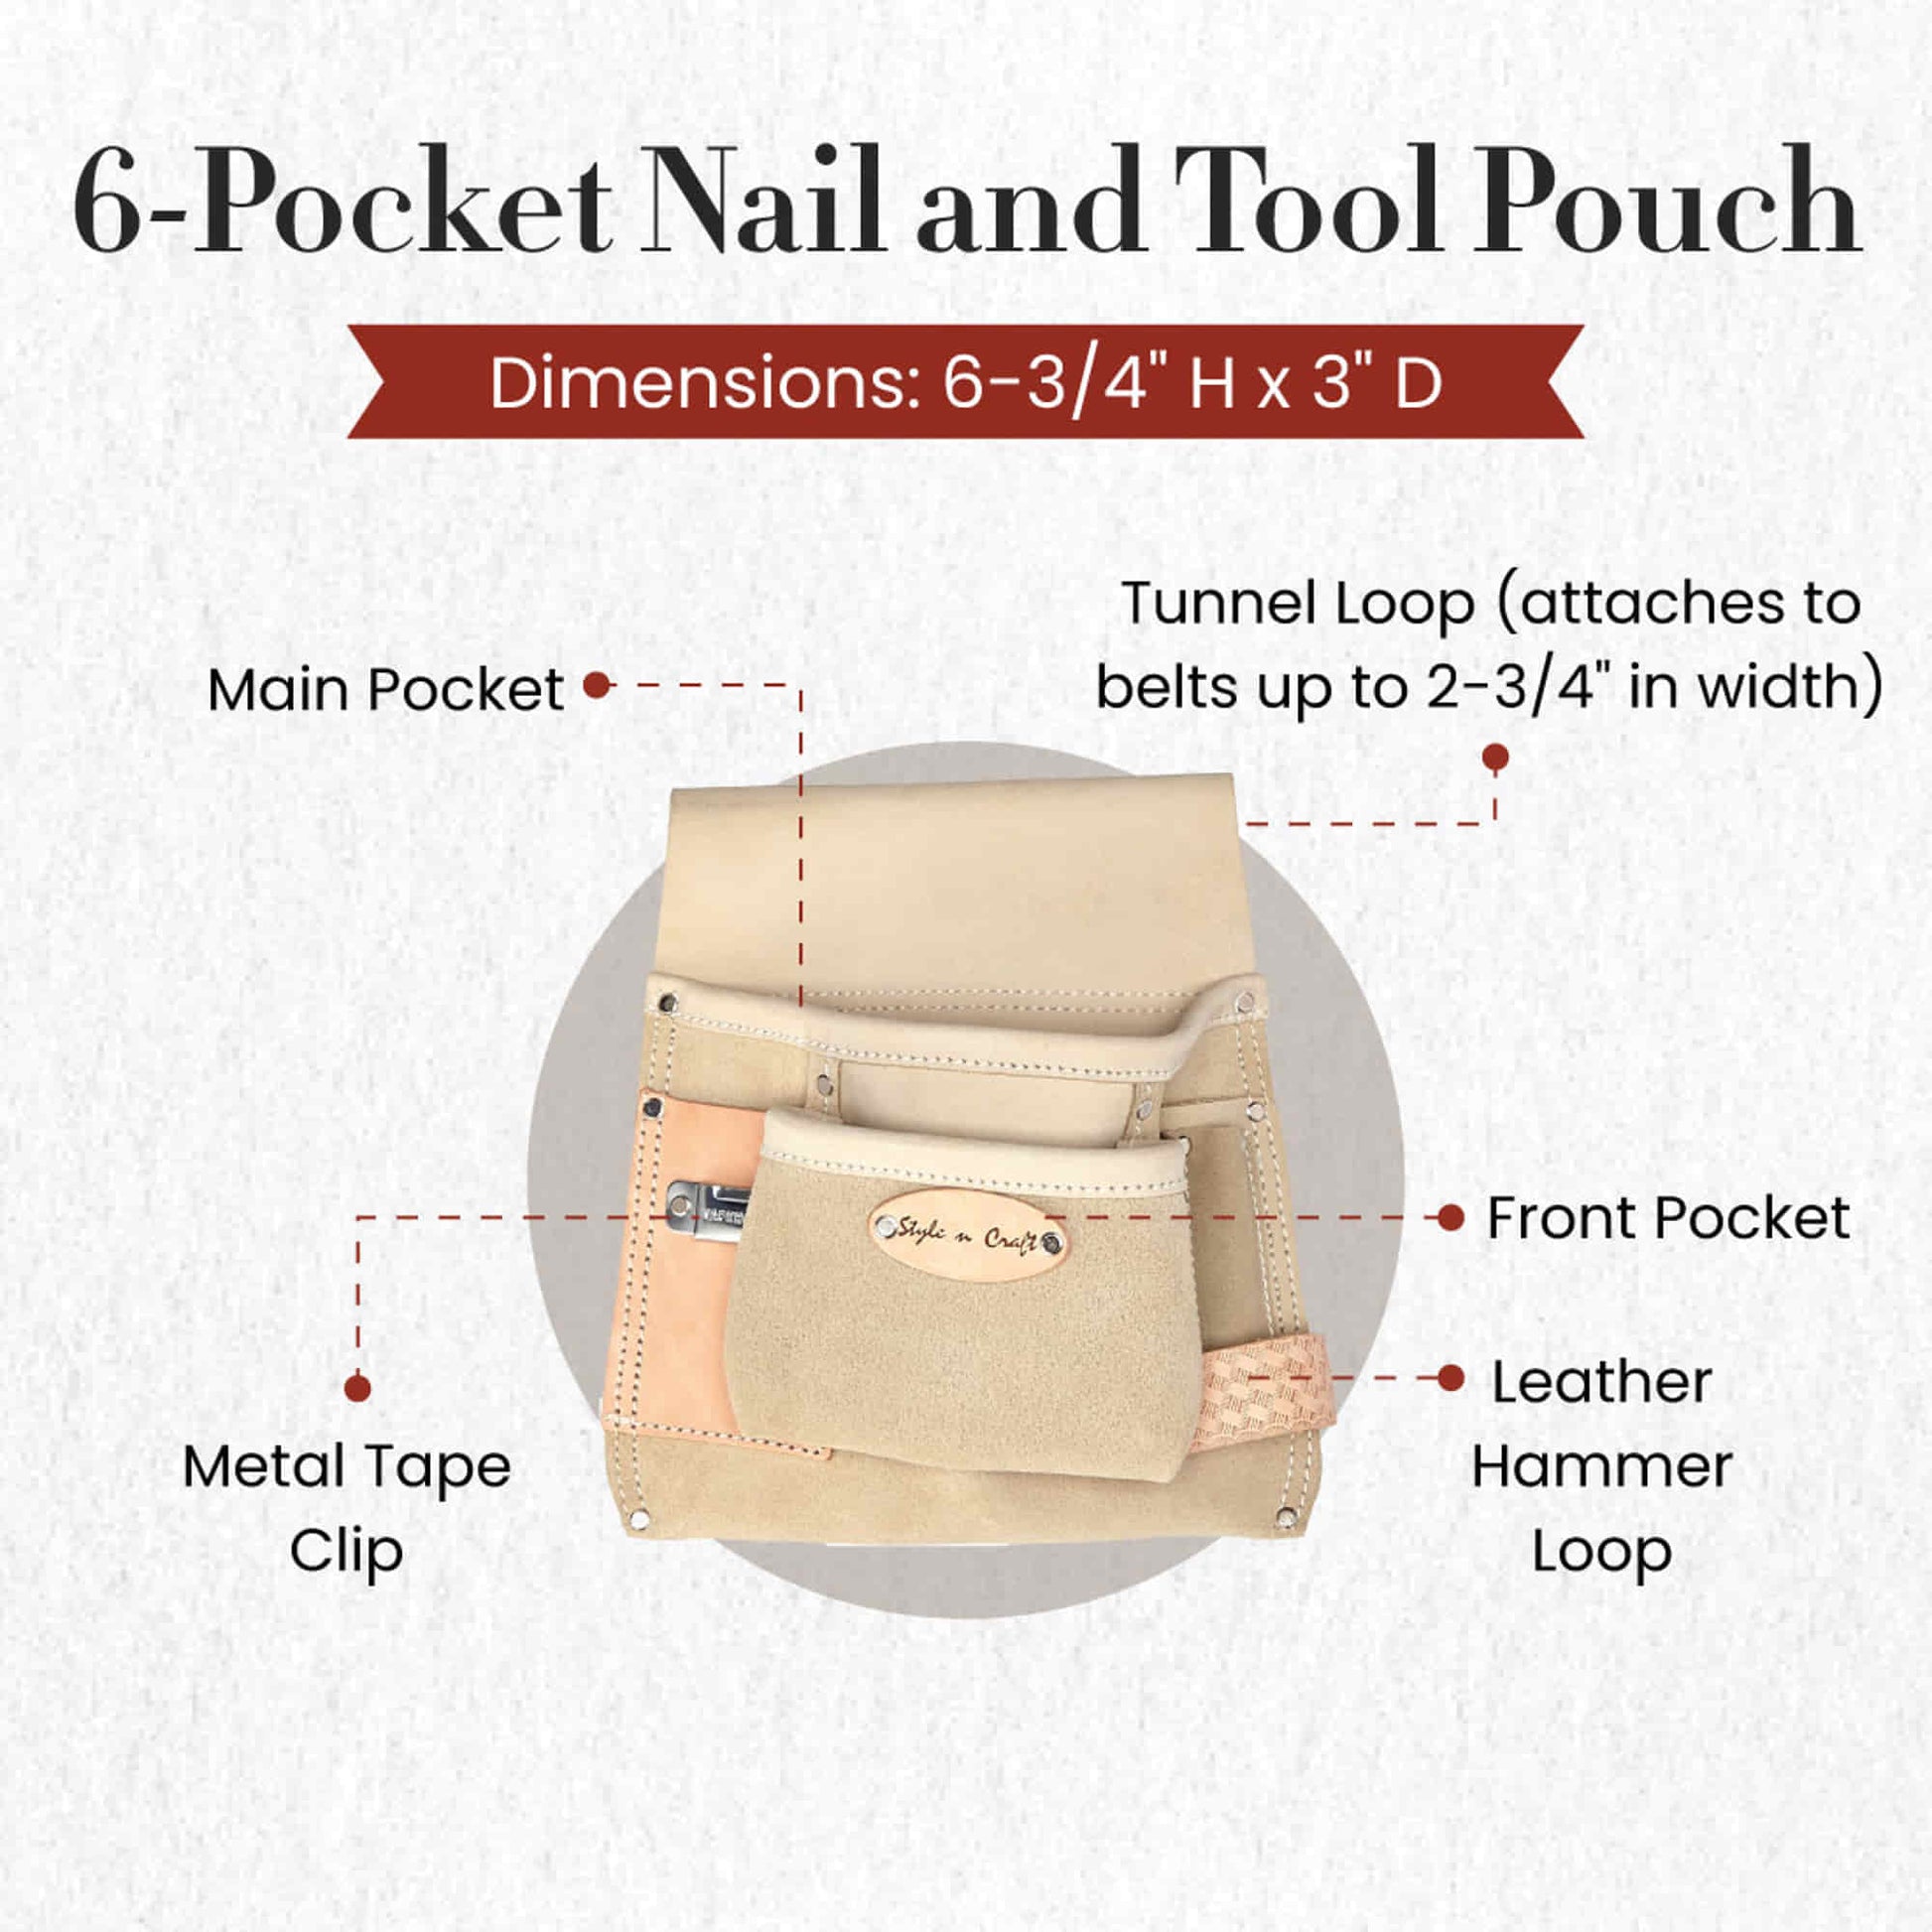 Style n Craft 92825 - 6 Pocket Nail & Tool Pouch in Grey Full Grain Leather with an Embossed Leather Hammer Loop & a Metal Tape Clip - Front View Showing the Details